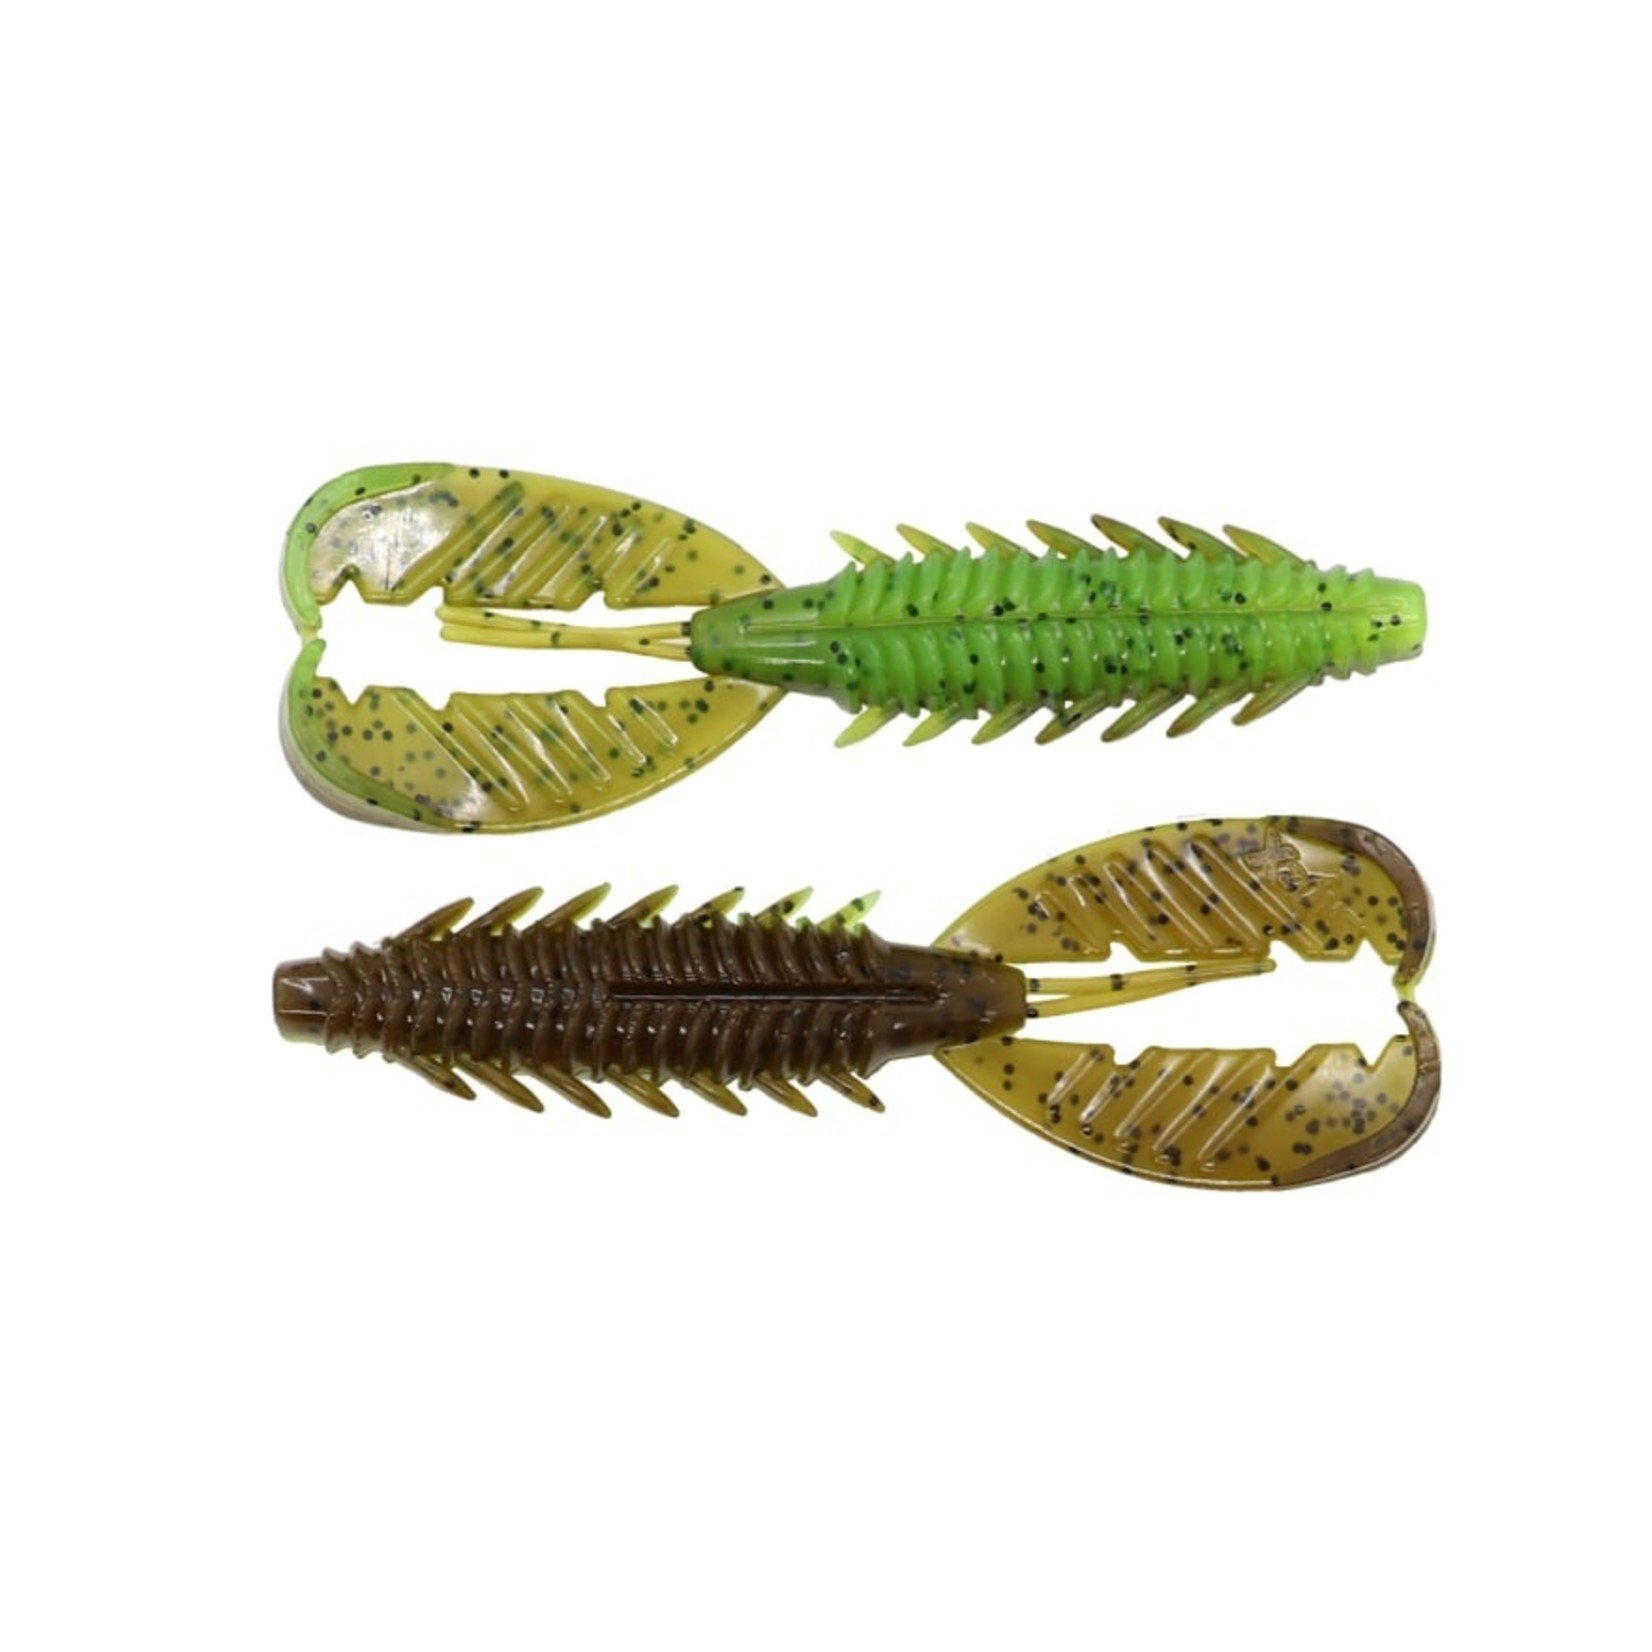 X Zone Lures X Zone Lures Adrenaline Craw - 4.25" (6 Pack)